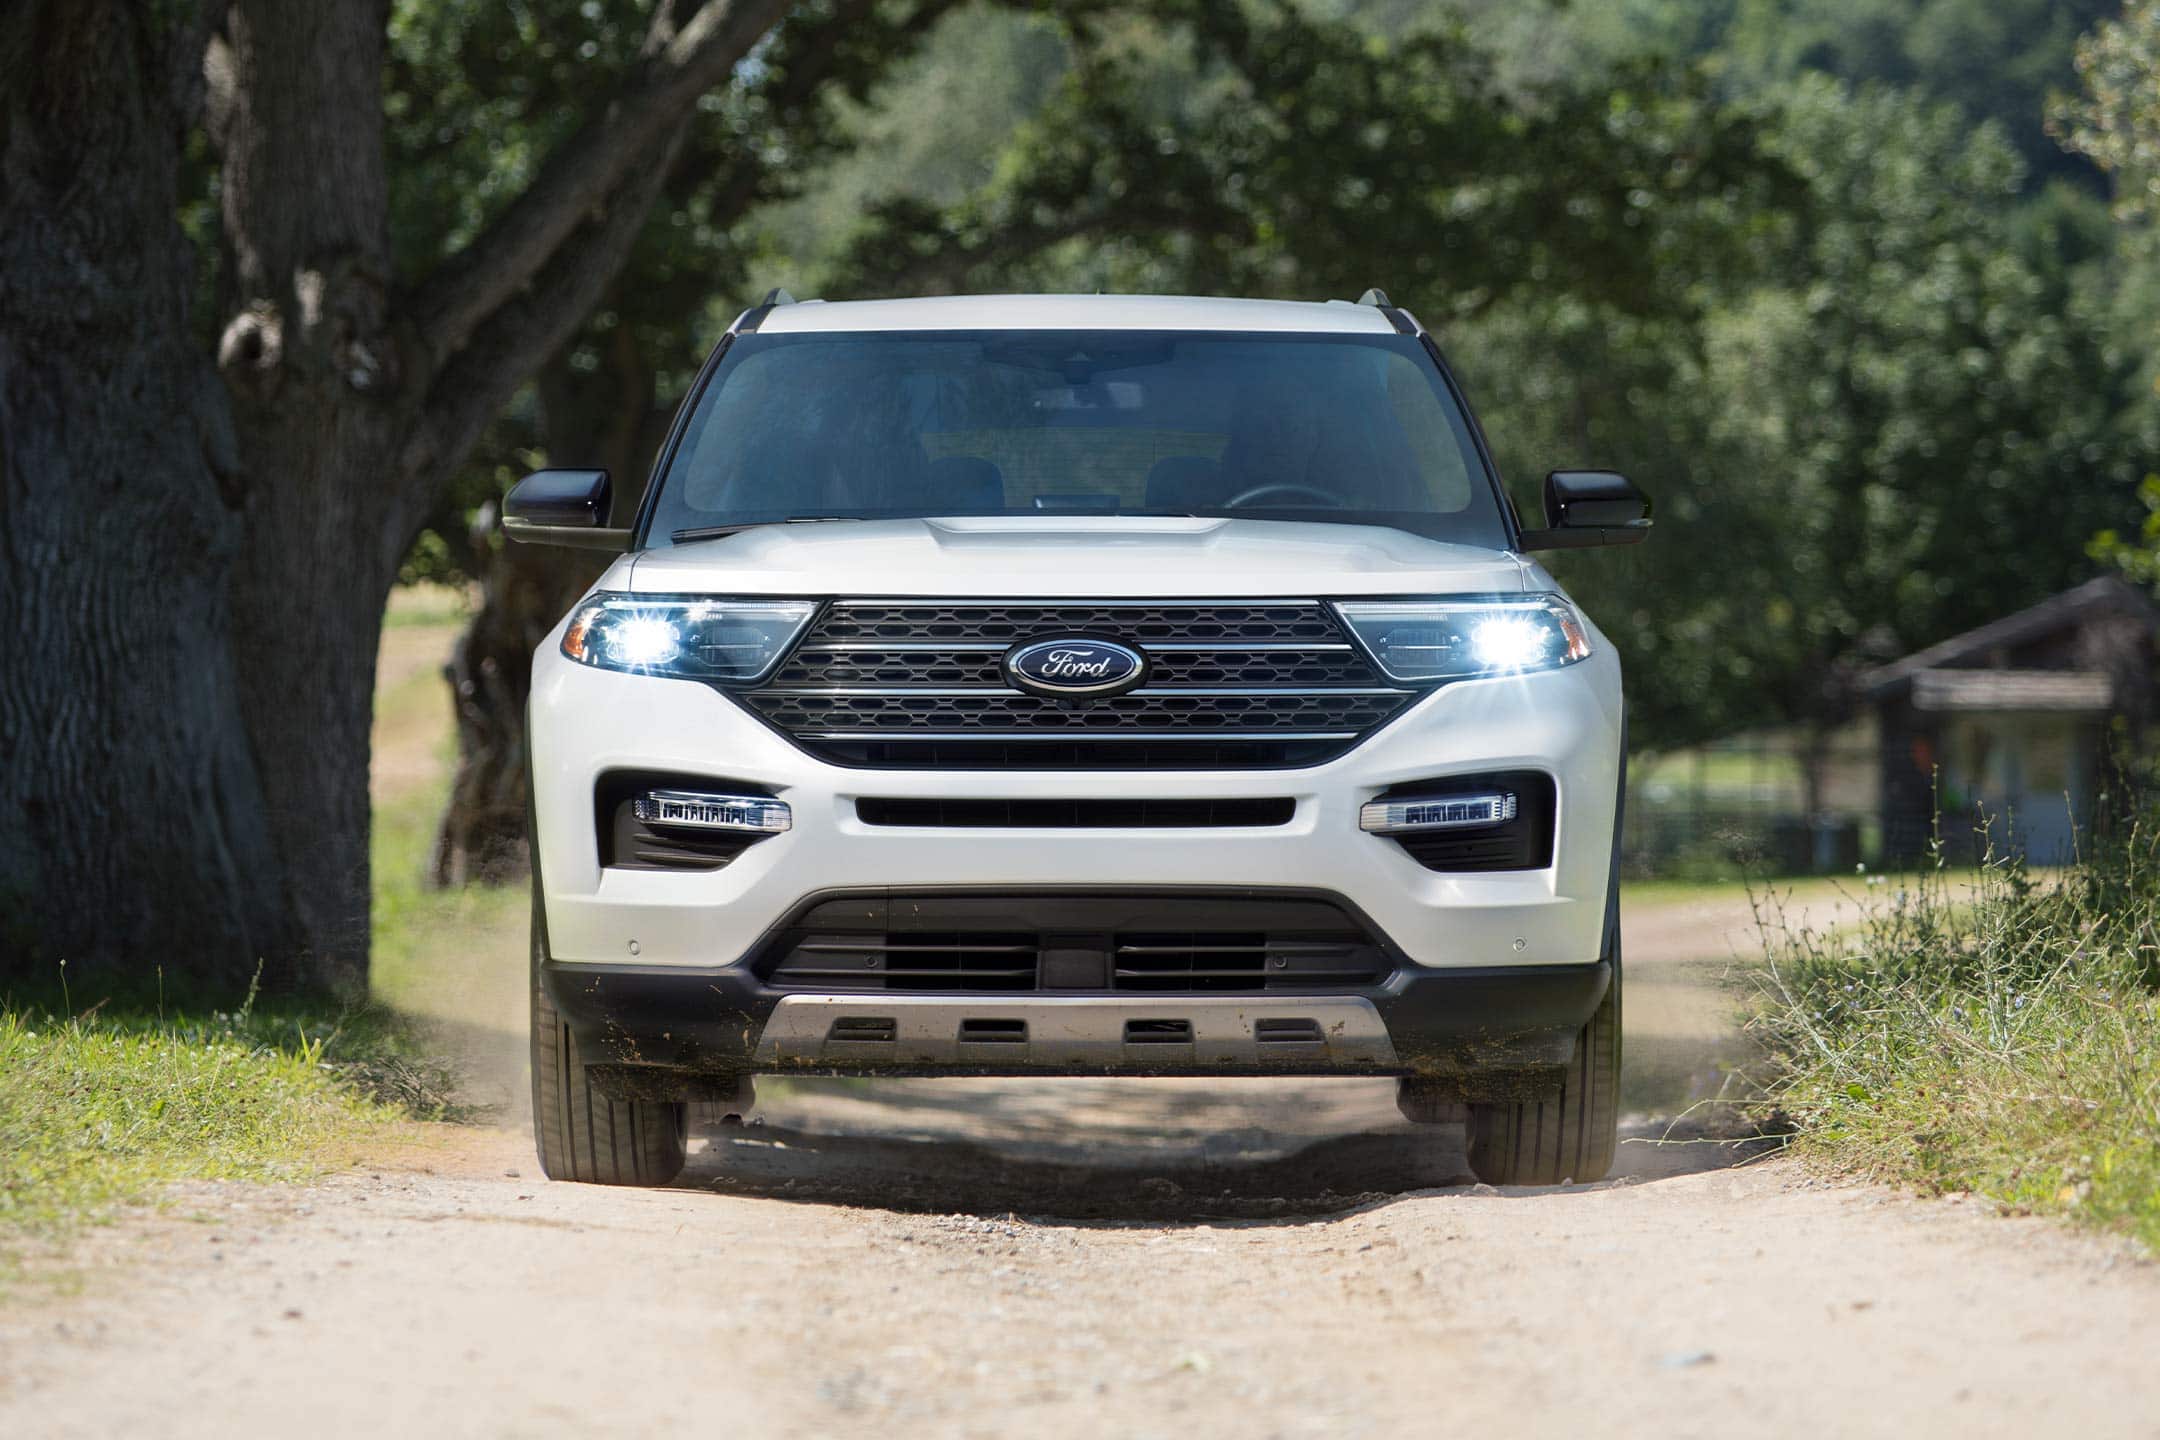 2023 Ford Explorer® King Ranch® model being driven on a dirt road